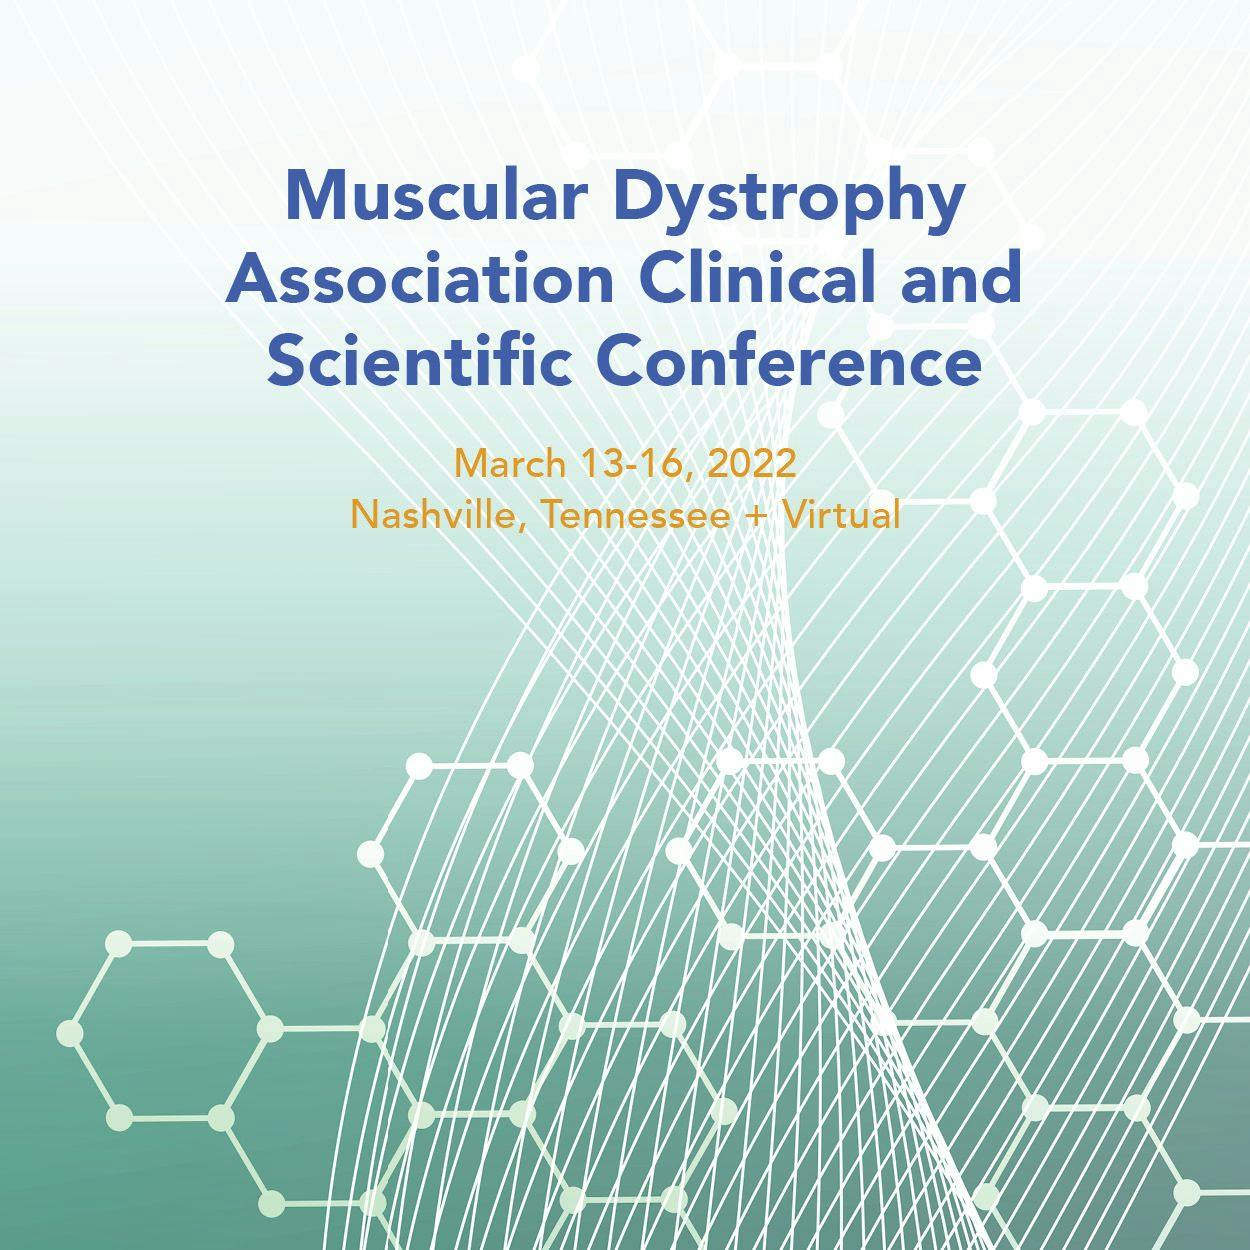 Muscular Dystrophy Association: A Hybrid Conference Featuring the Latest Advances in Neuromuscular Research, Therapy, and Clinical Care  